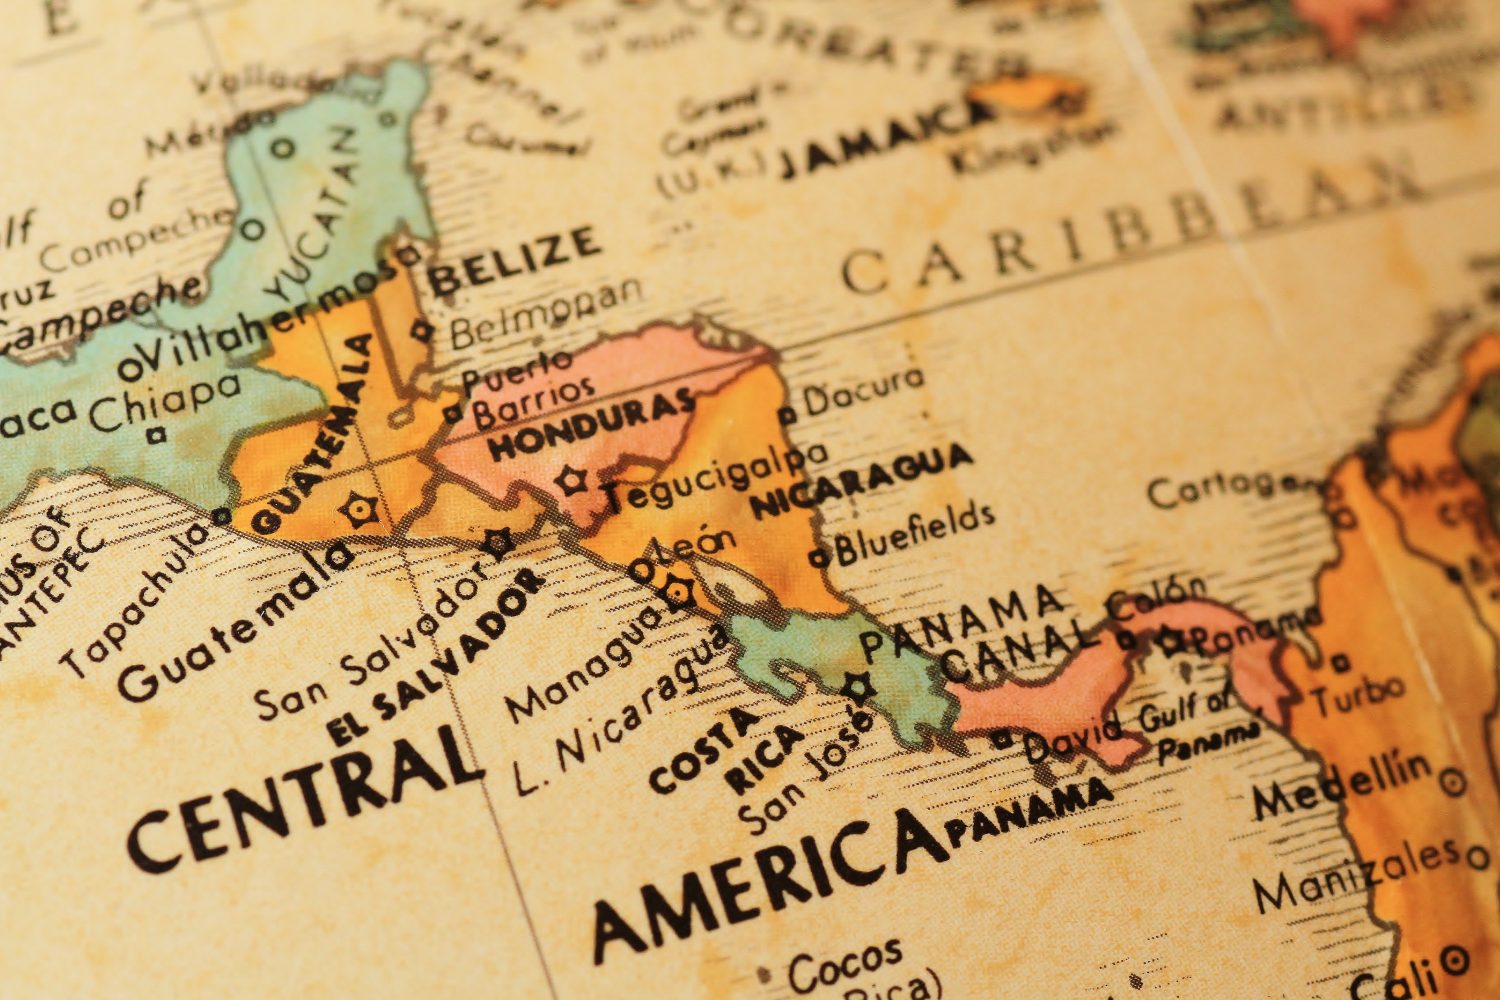 Central America: A region of great potential